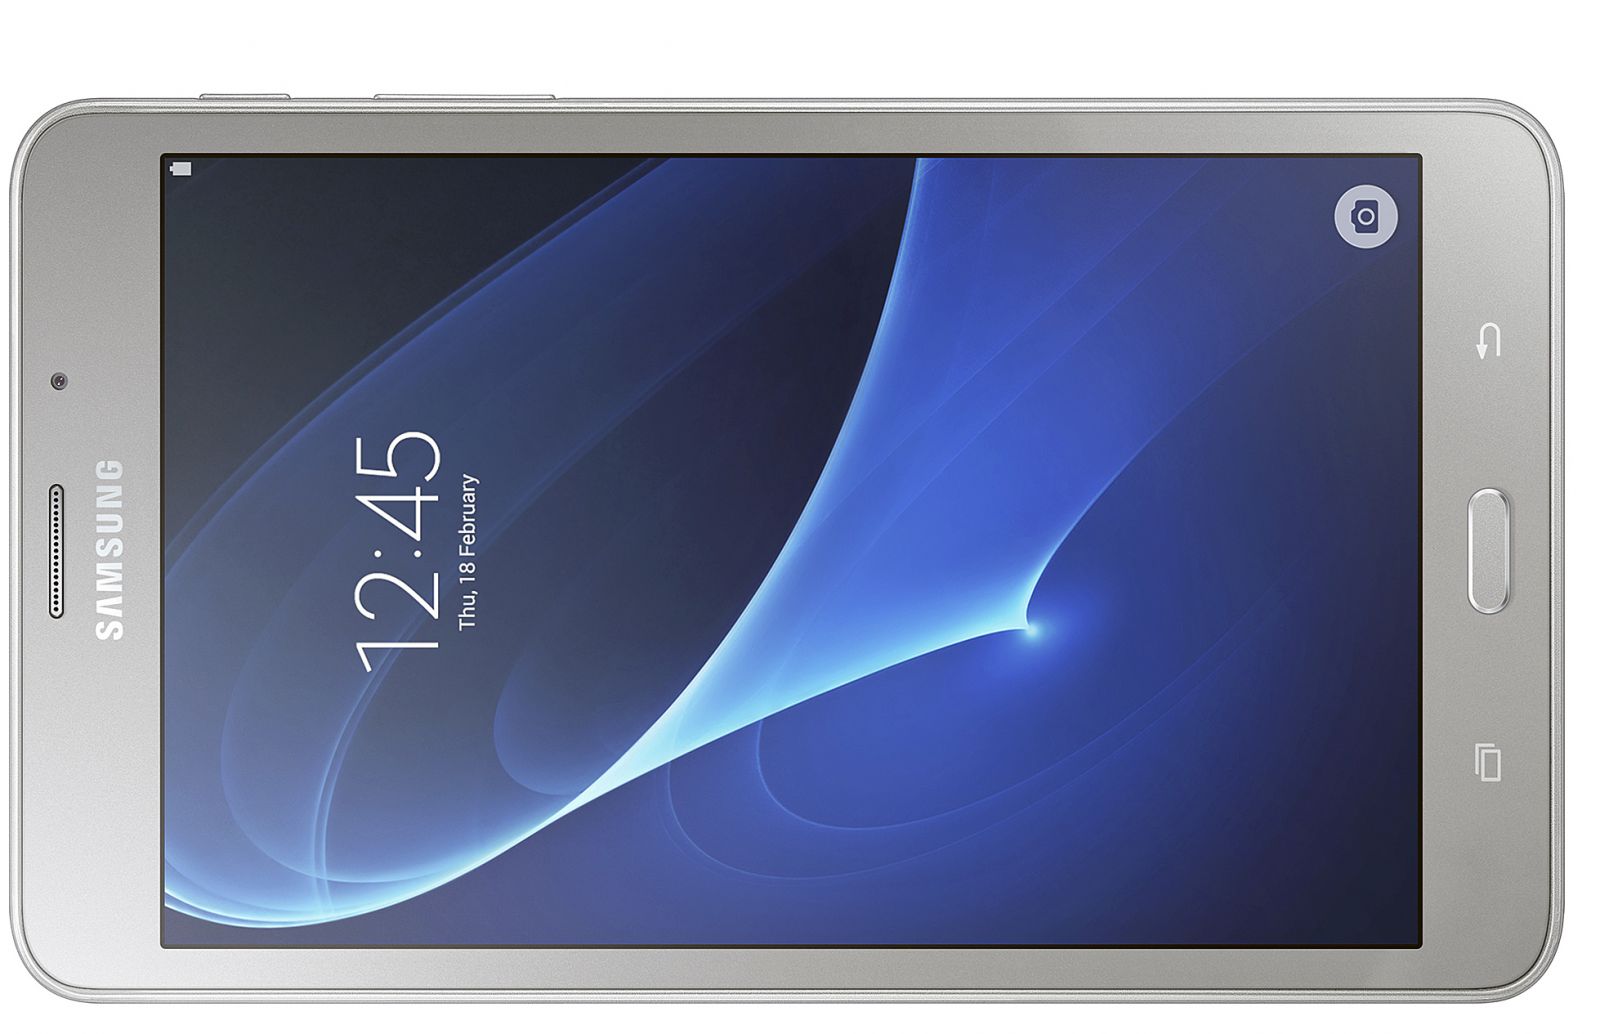 Samsung launches new tablet